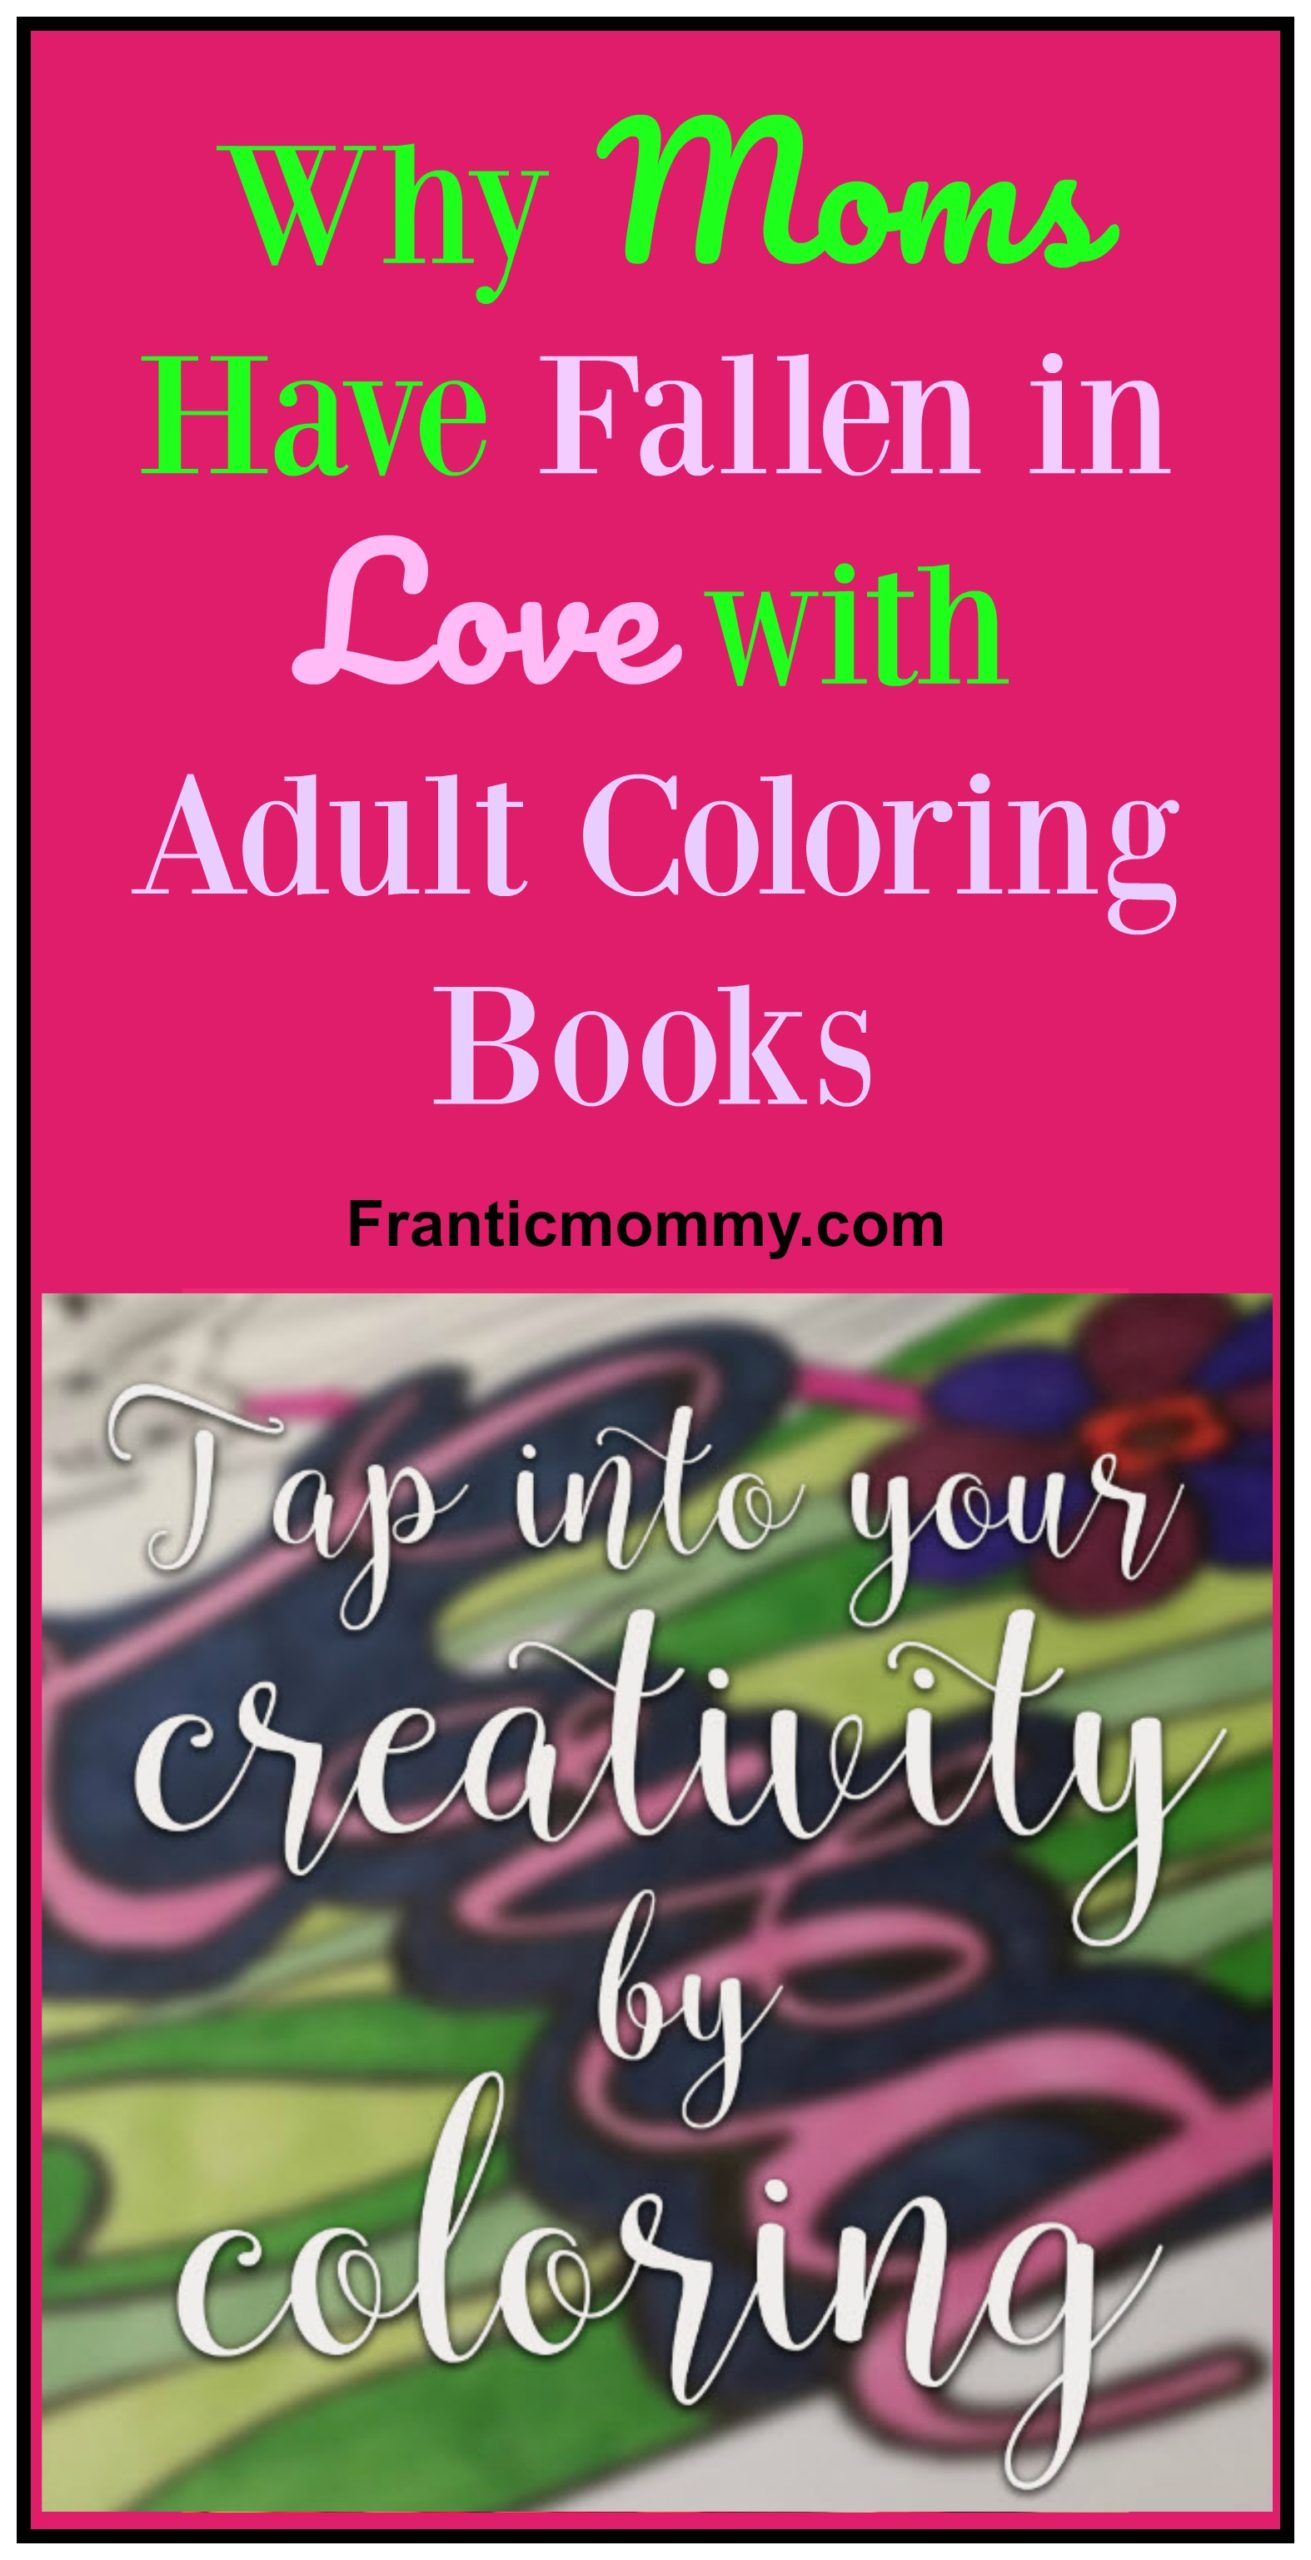 Why Moms Have Fallen in Love with Adult Coloring Books